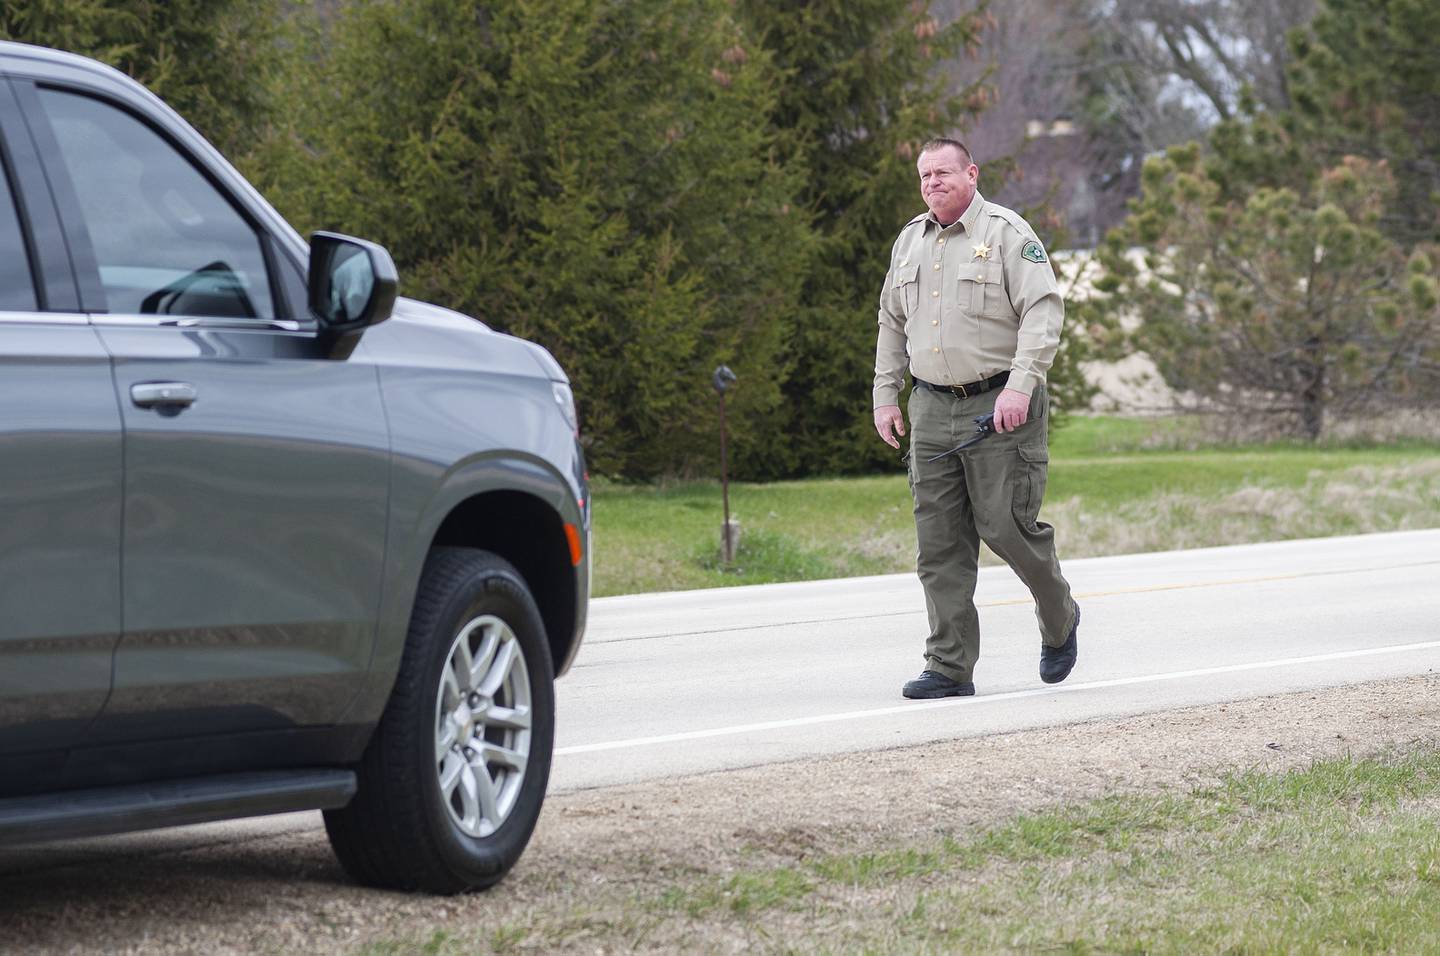 Whiteside County sheriff John Booker works at the scene of a fatal shooting that took place at 9:30 a.m. north of Sterling Monday, April 18, 2022.